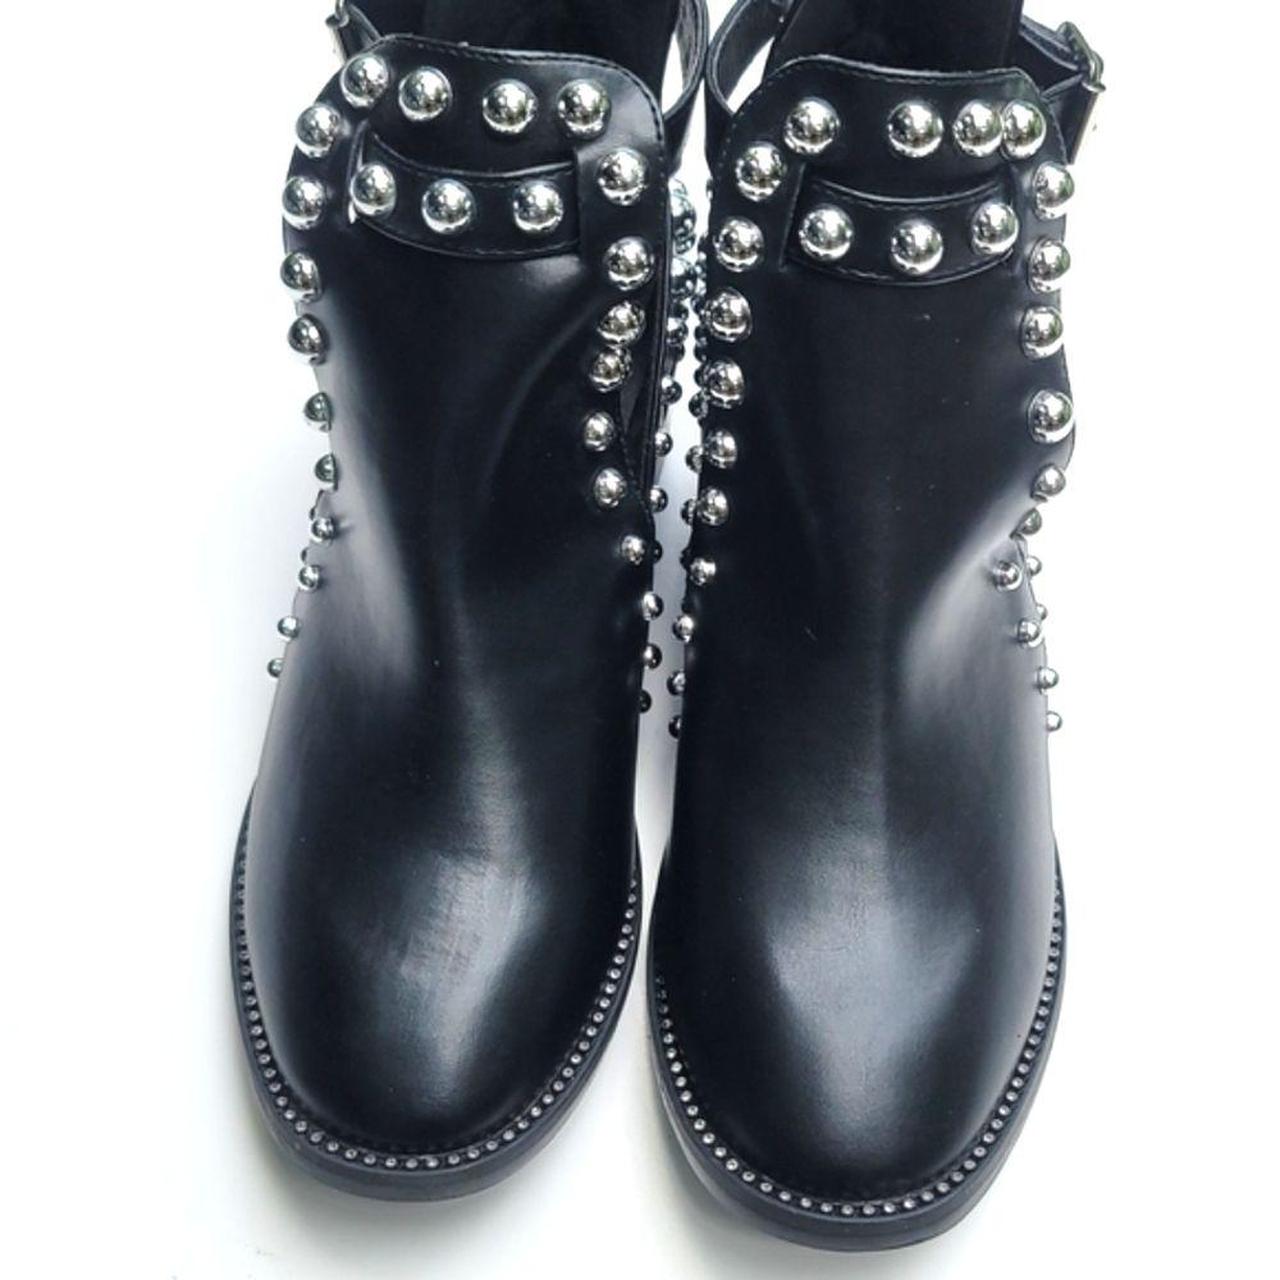 Studded ankle boots by Jolimall